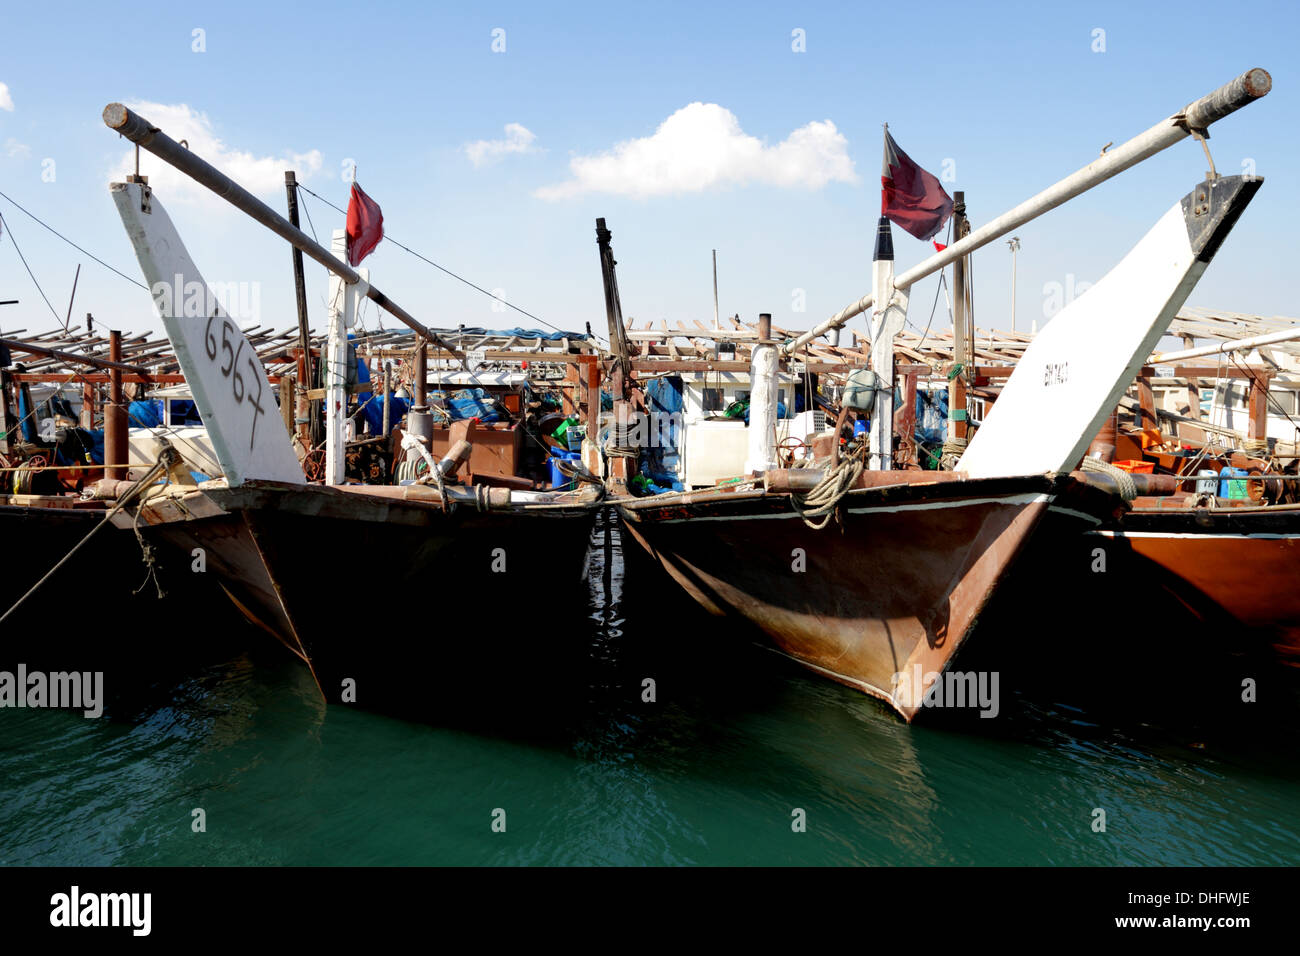 Fishing dhows at harbour in Bahrain Stock Photo